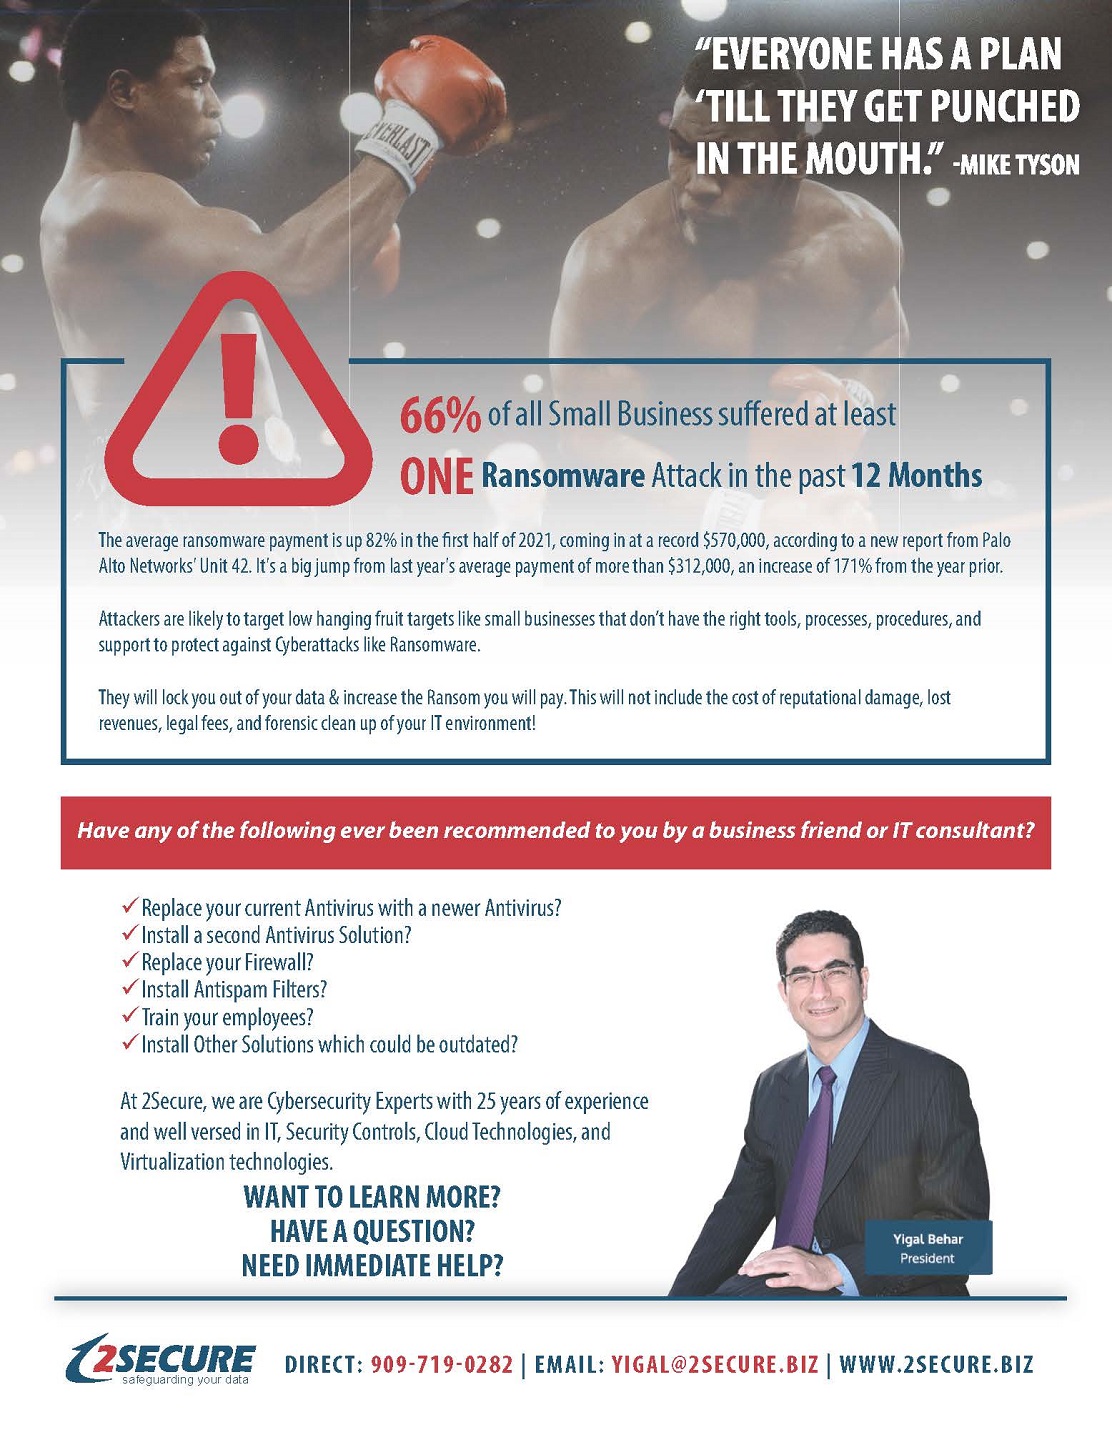 Cybersecurity Consultancy Provides Ransomware Protection In Long Island, NYC